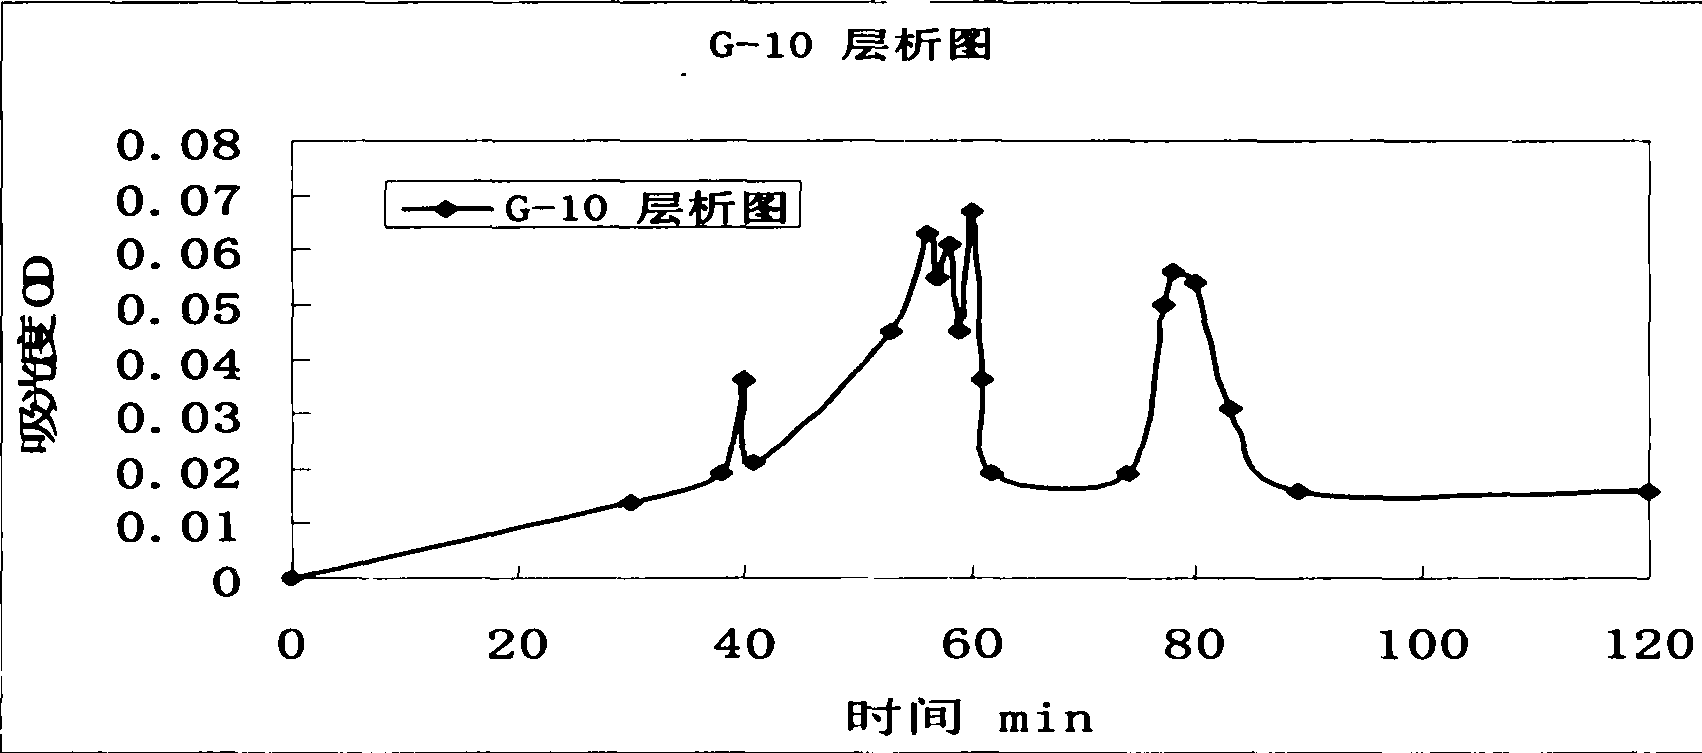 Design and fermented production of recombinant peptide for reducing blood pressure